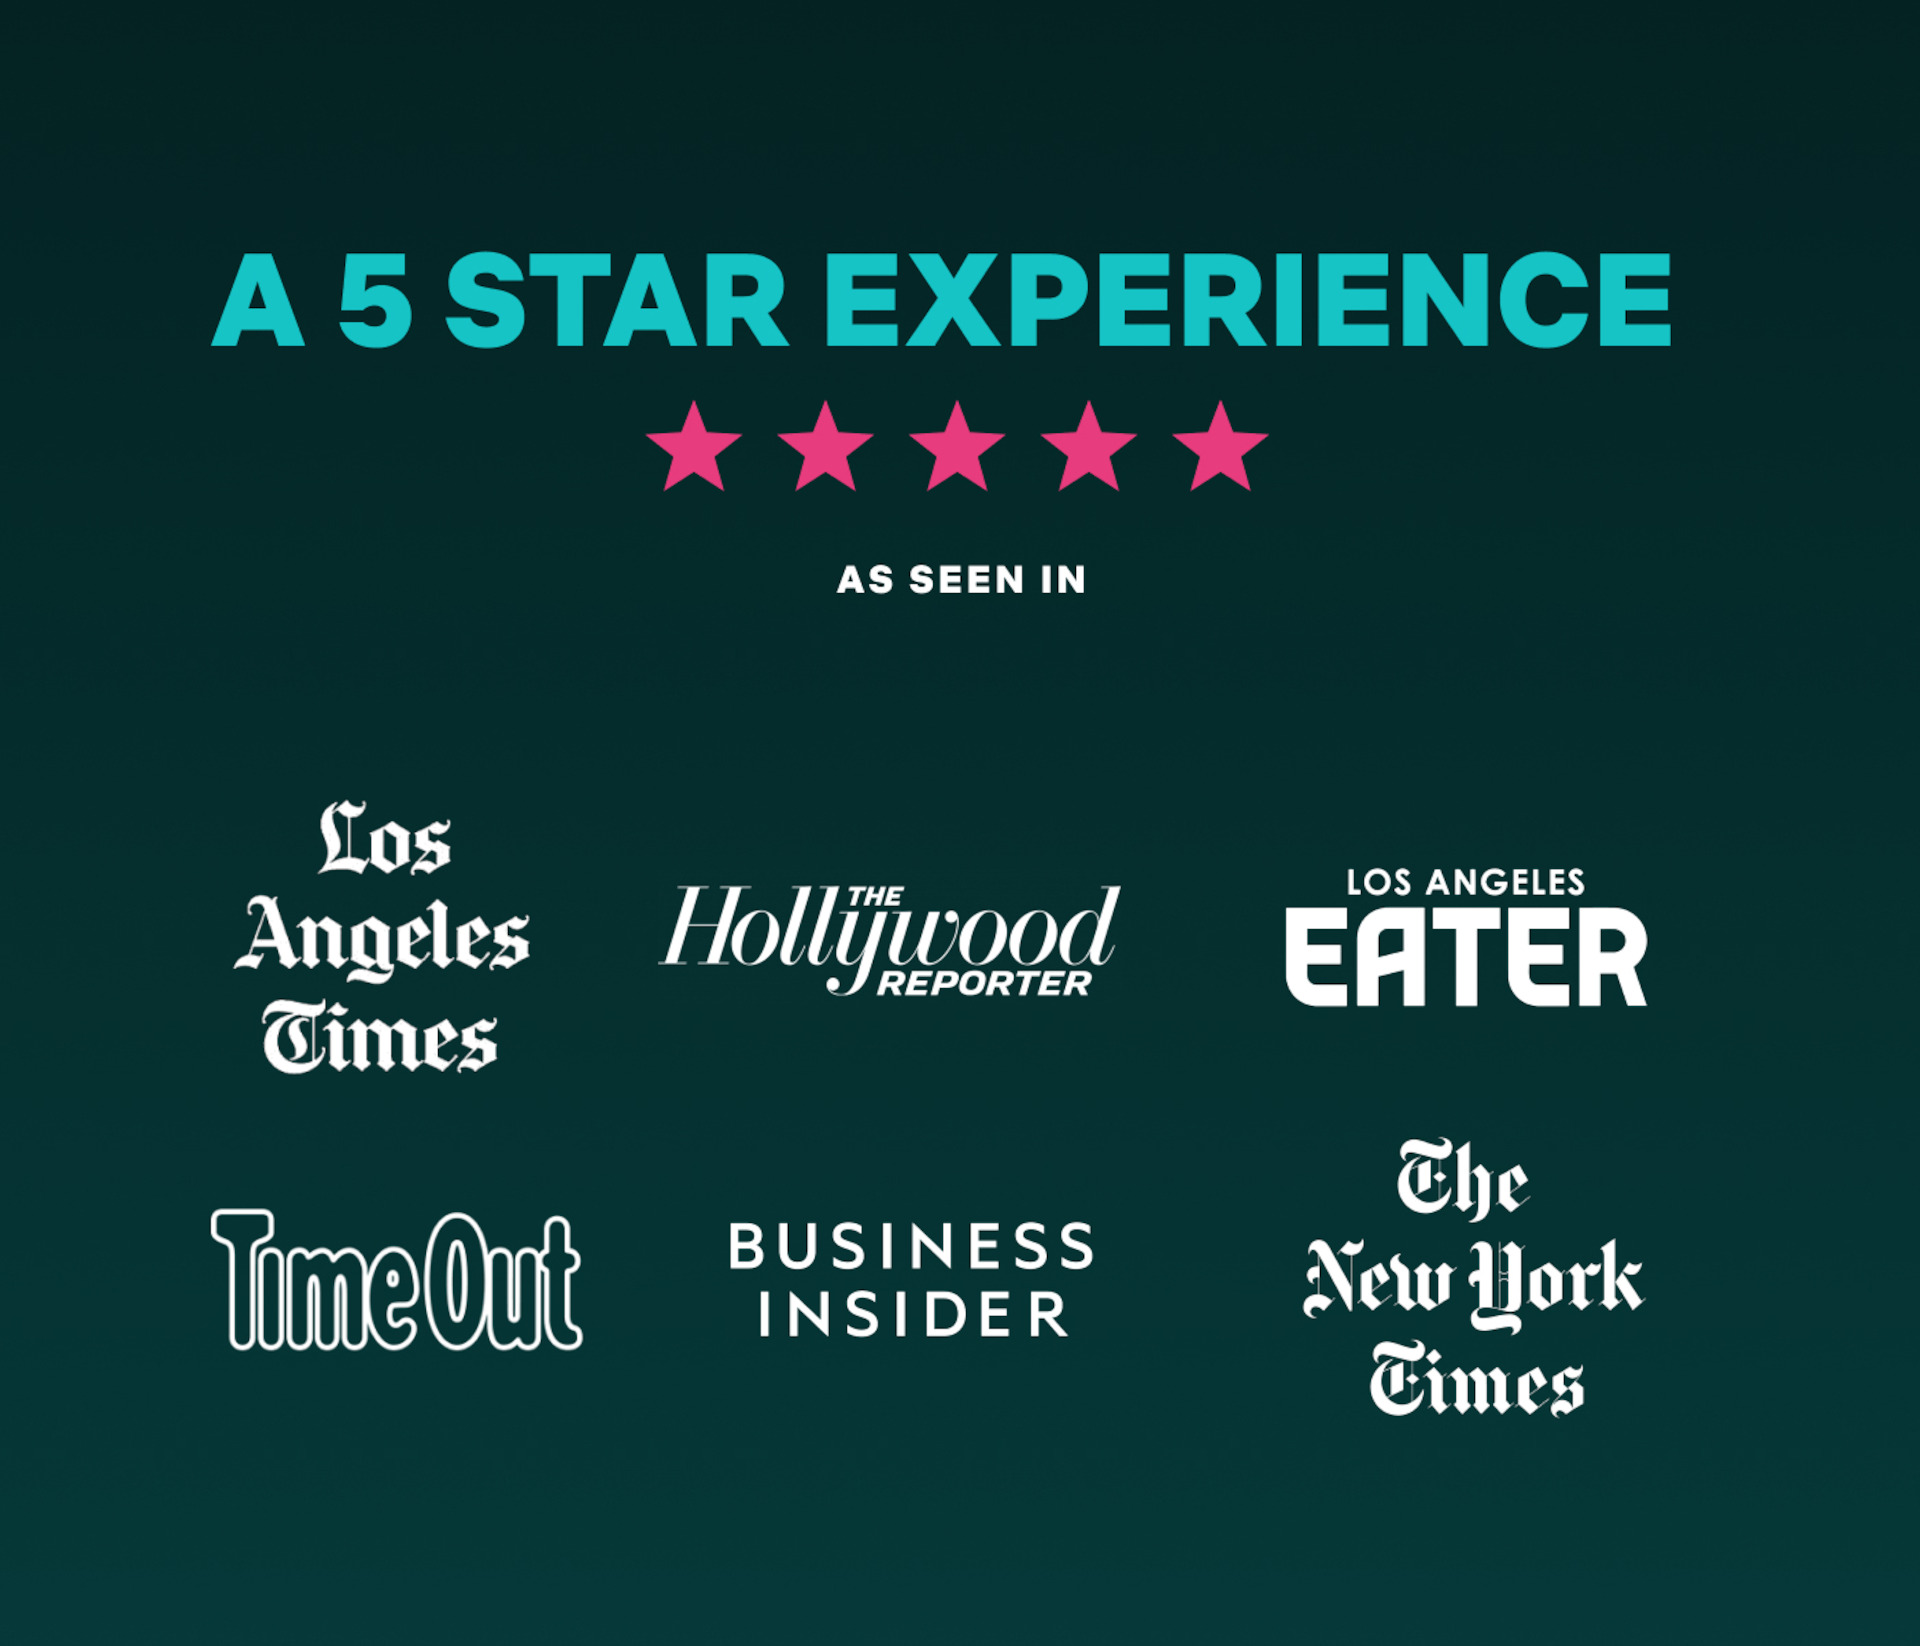 A banner with text ‘A 5 star experience’ ***** ‘Los Angeles Times’ ‘Los Angeles Eater’ ‘The Hollywood Reporter ‘ ‘TimeOut’ ‘Business Insider’ ‘The New York Times’ 